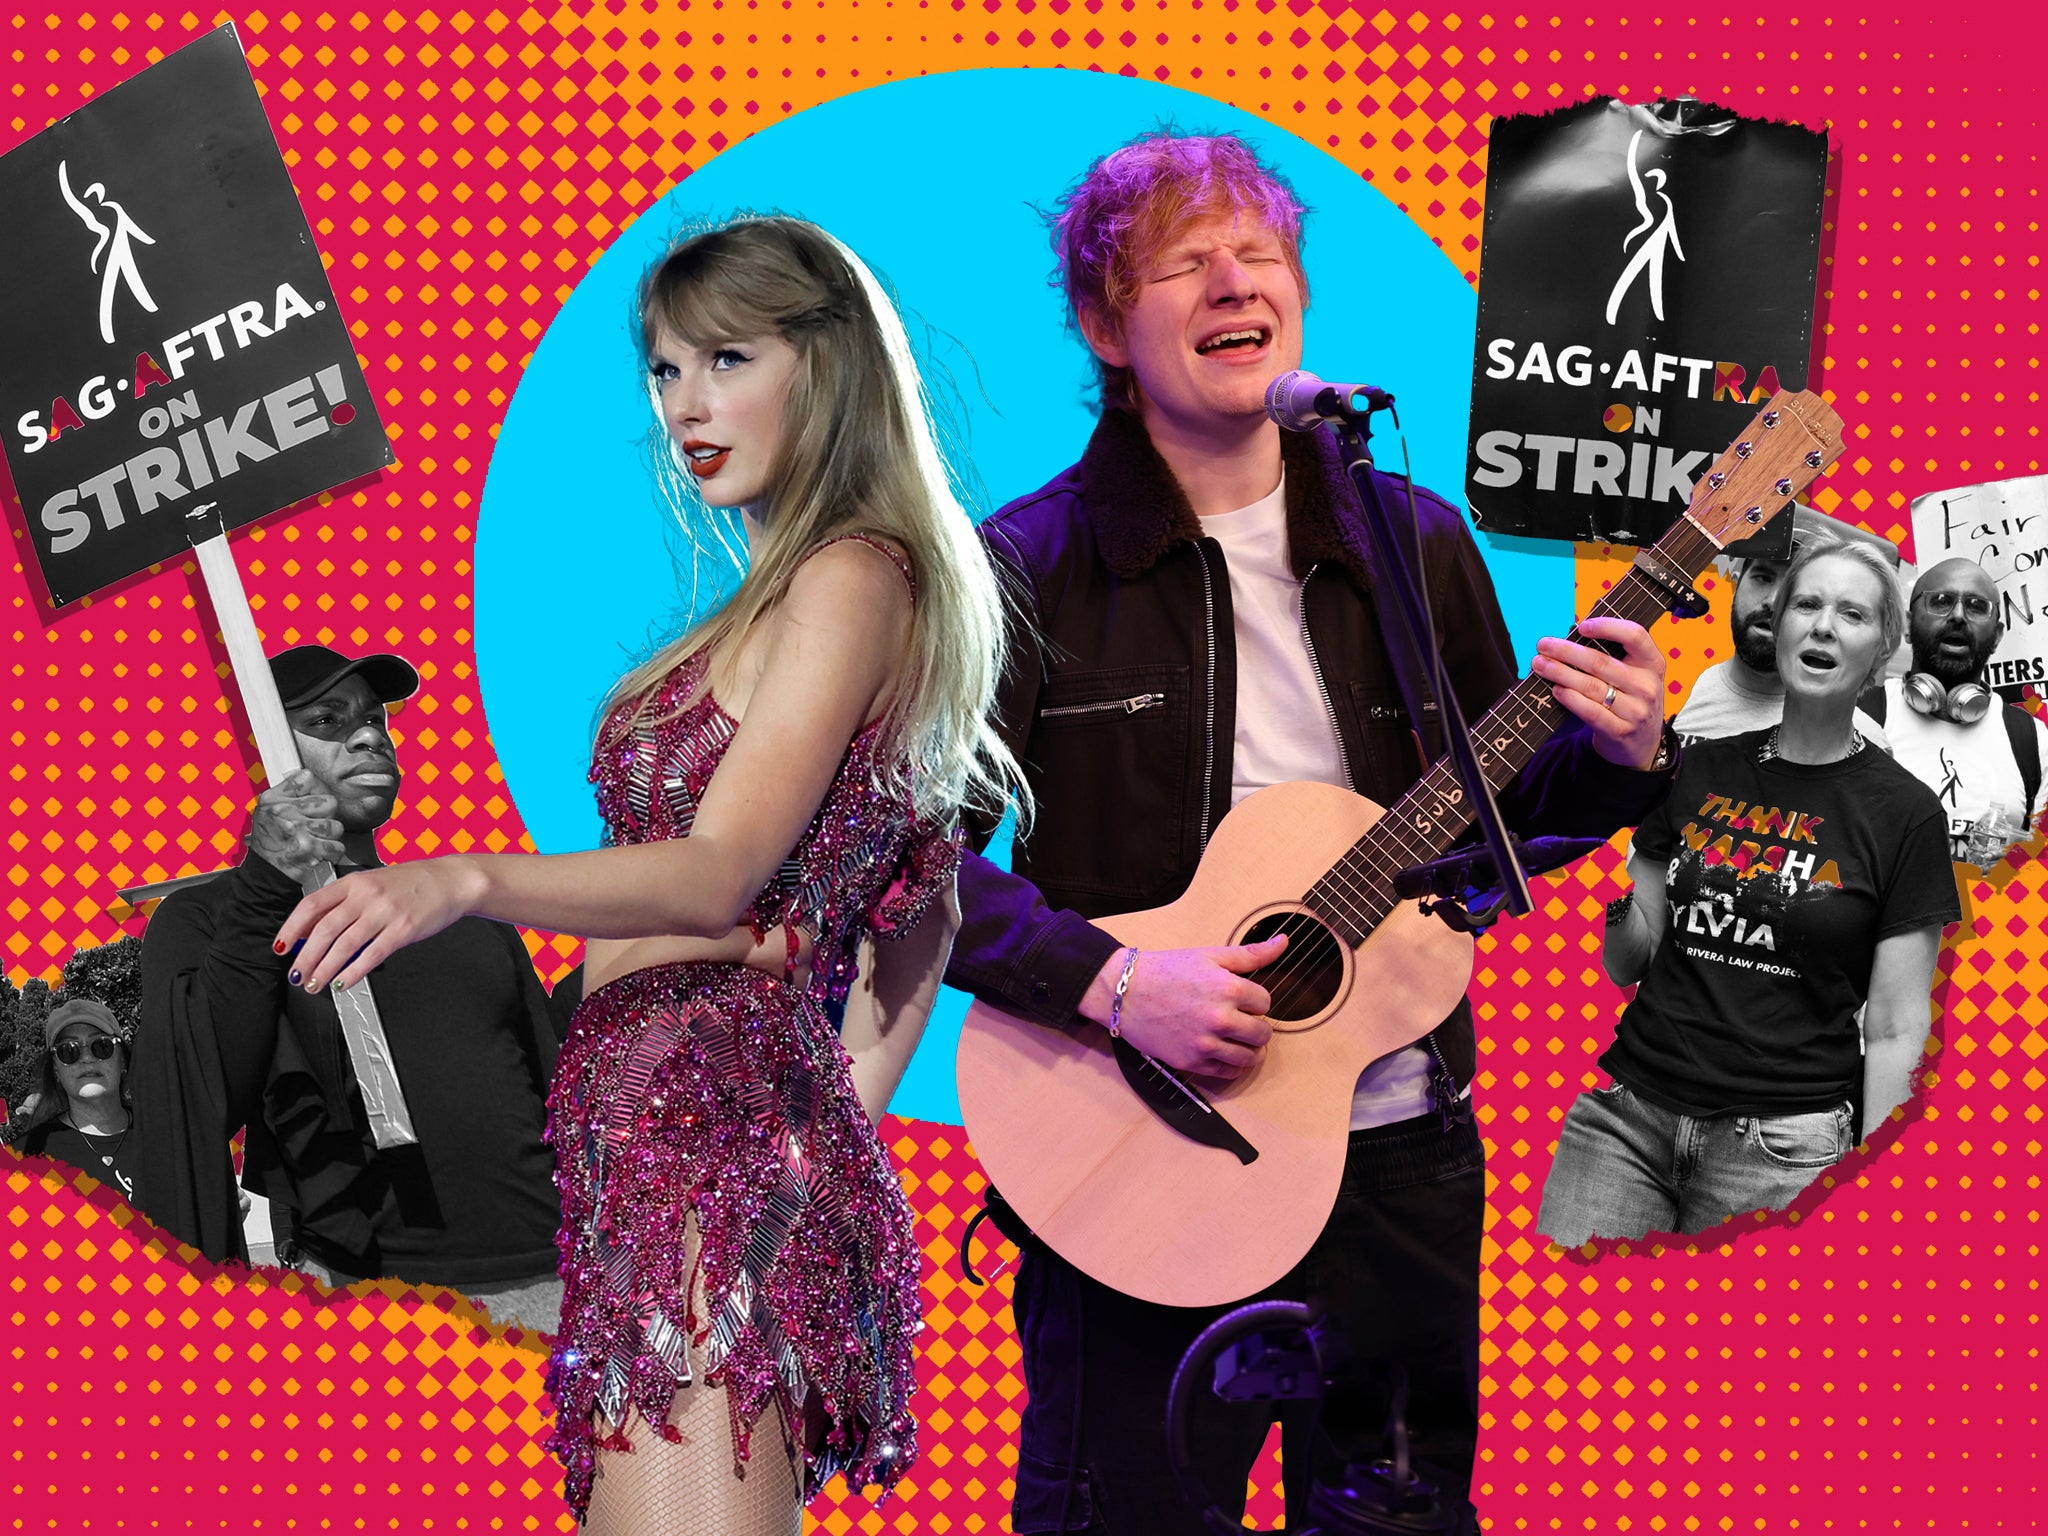 Big names, like Swift and Sheeran, must stand in solidarity with less-powerful individuals